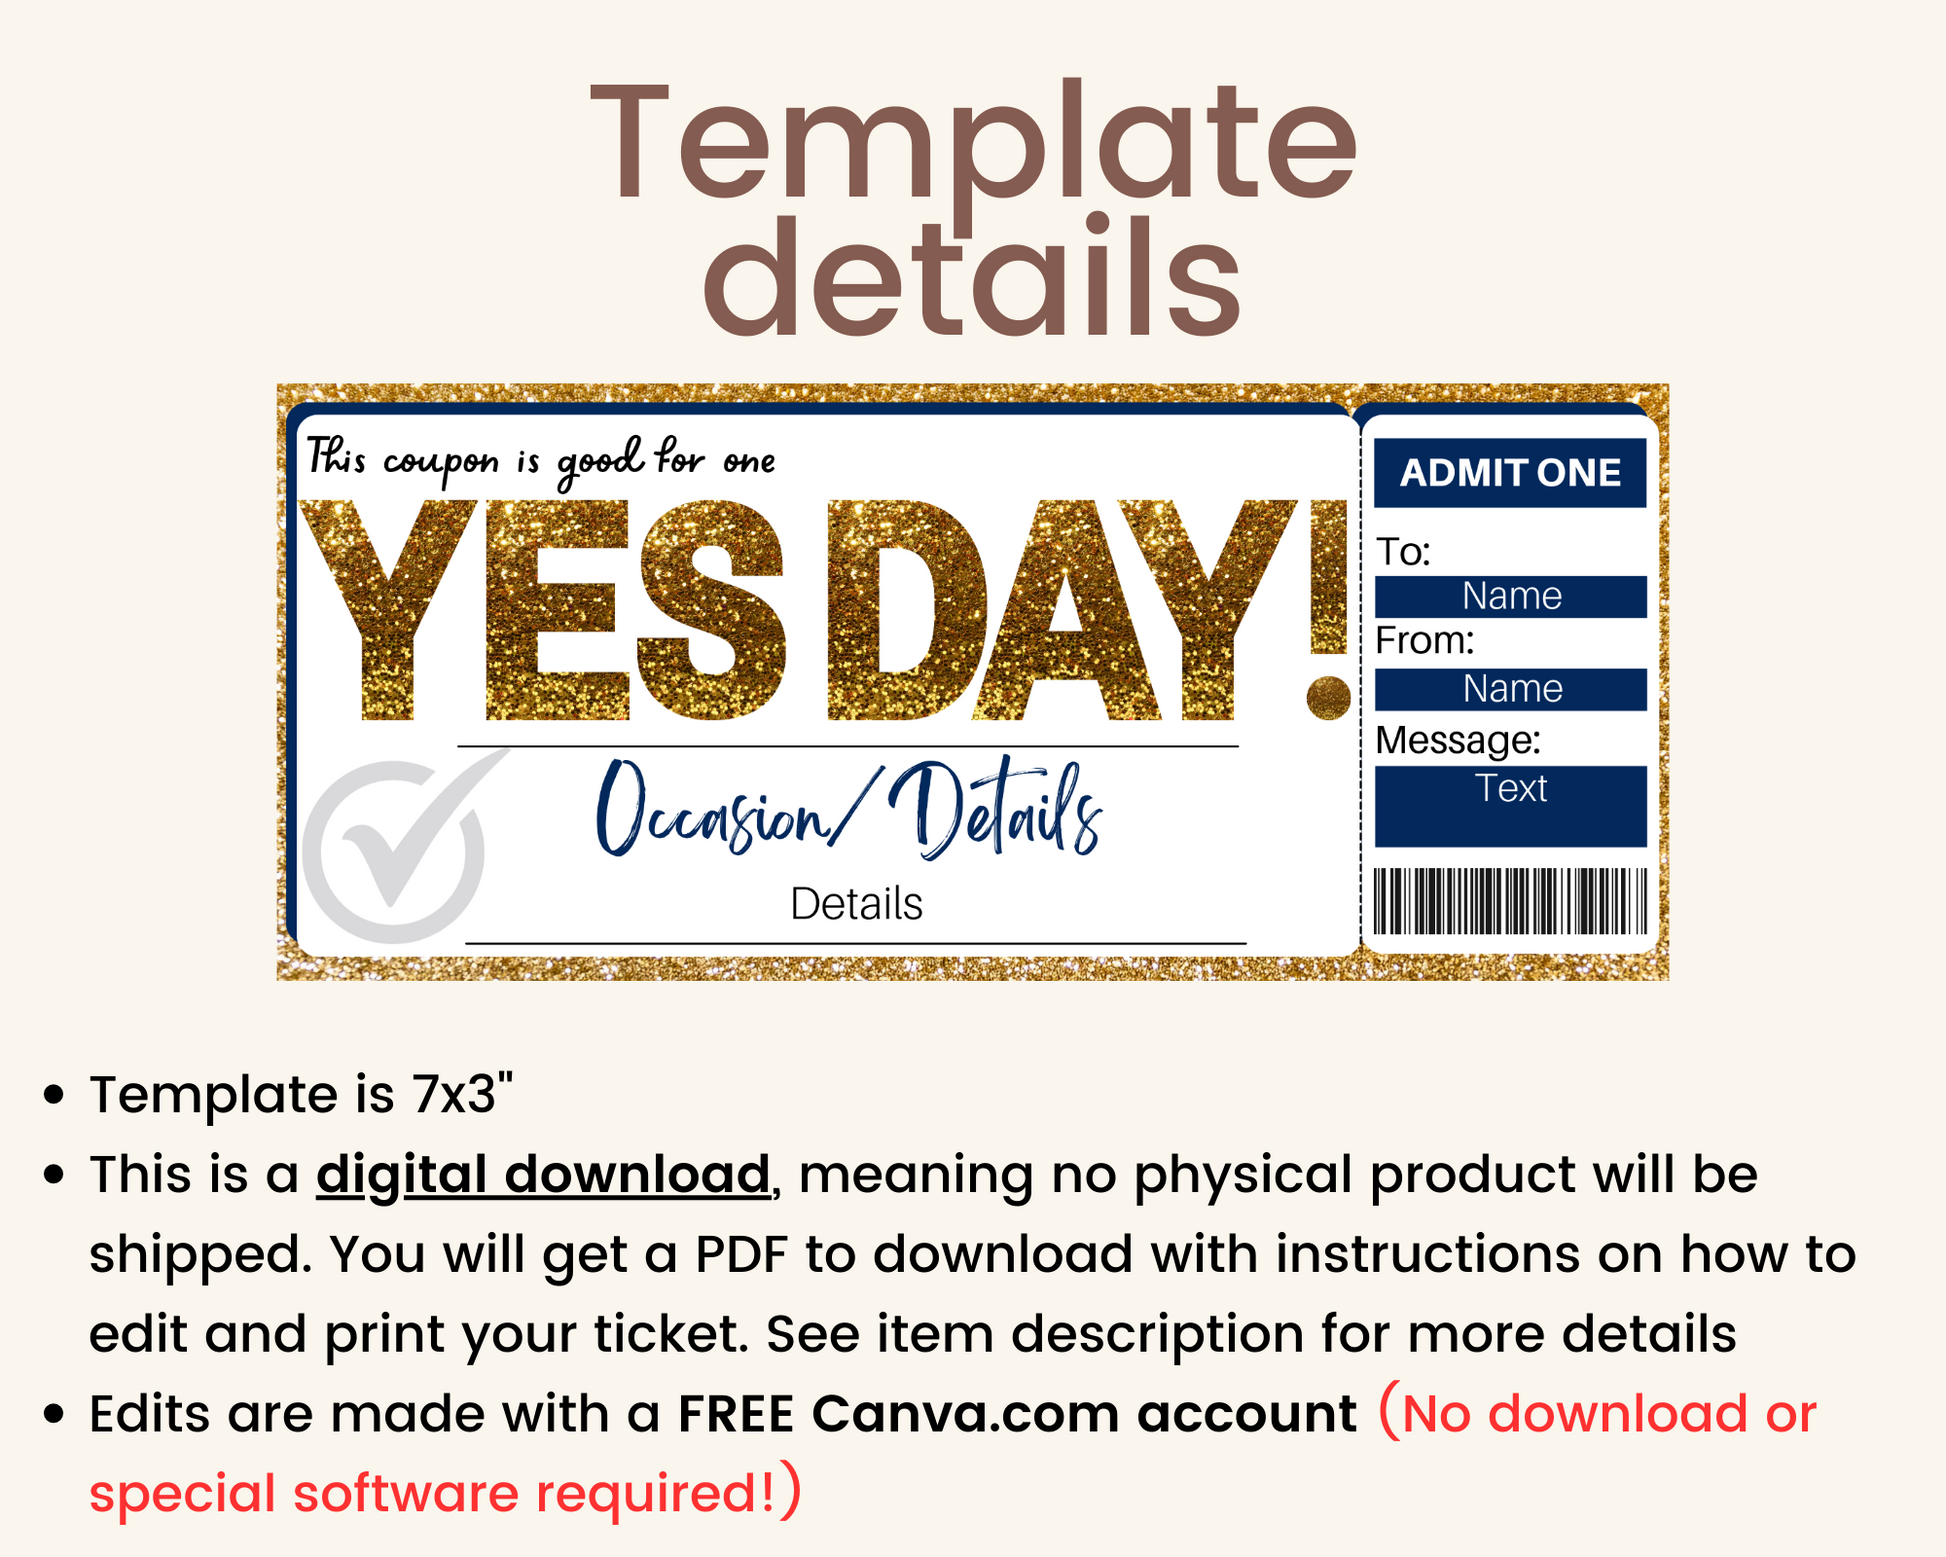 Day Off Gift Coupon INSTANT DOWNLOAD editable text -  Portugal